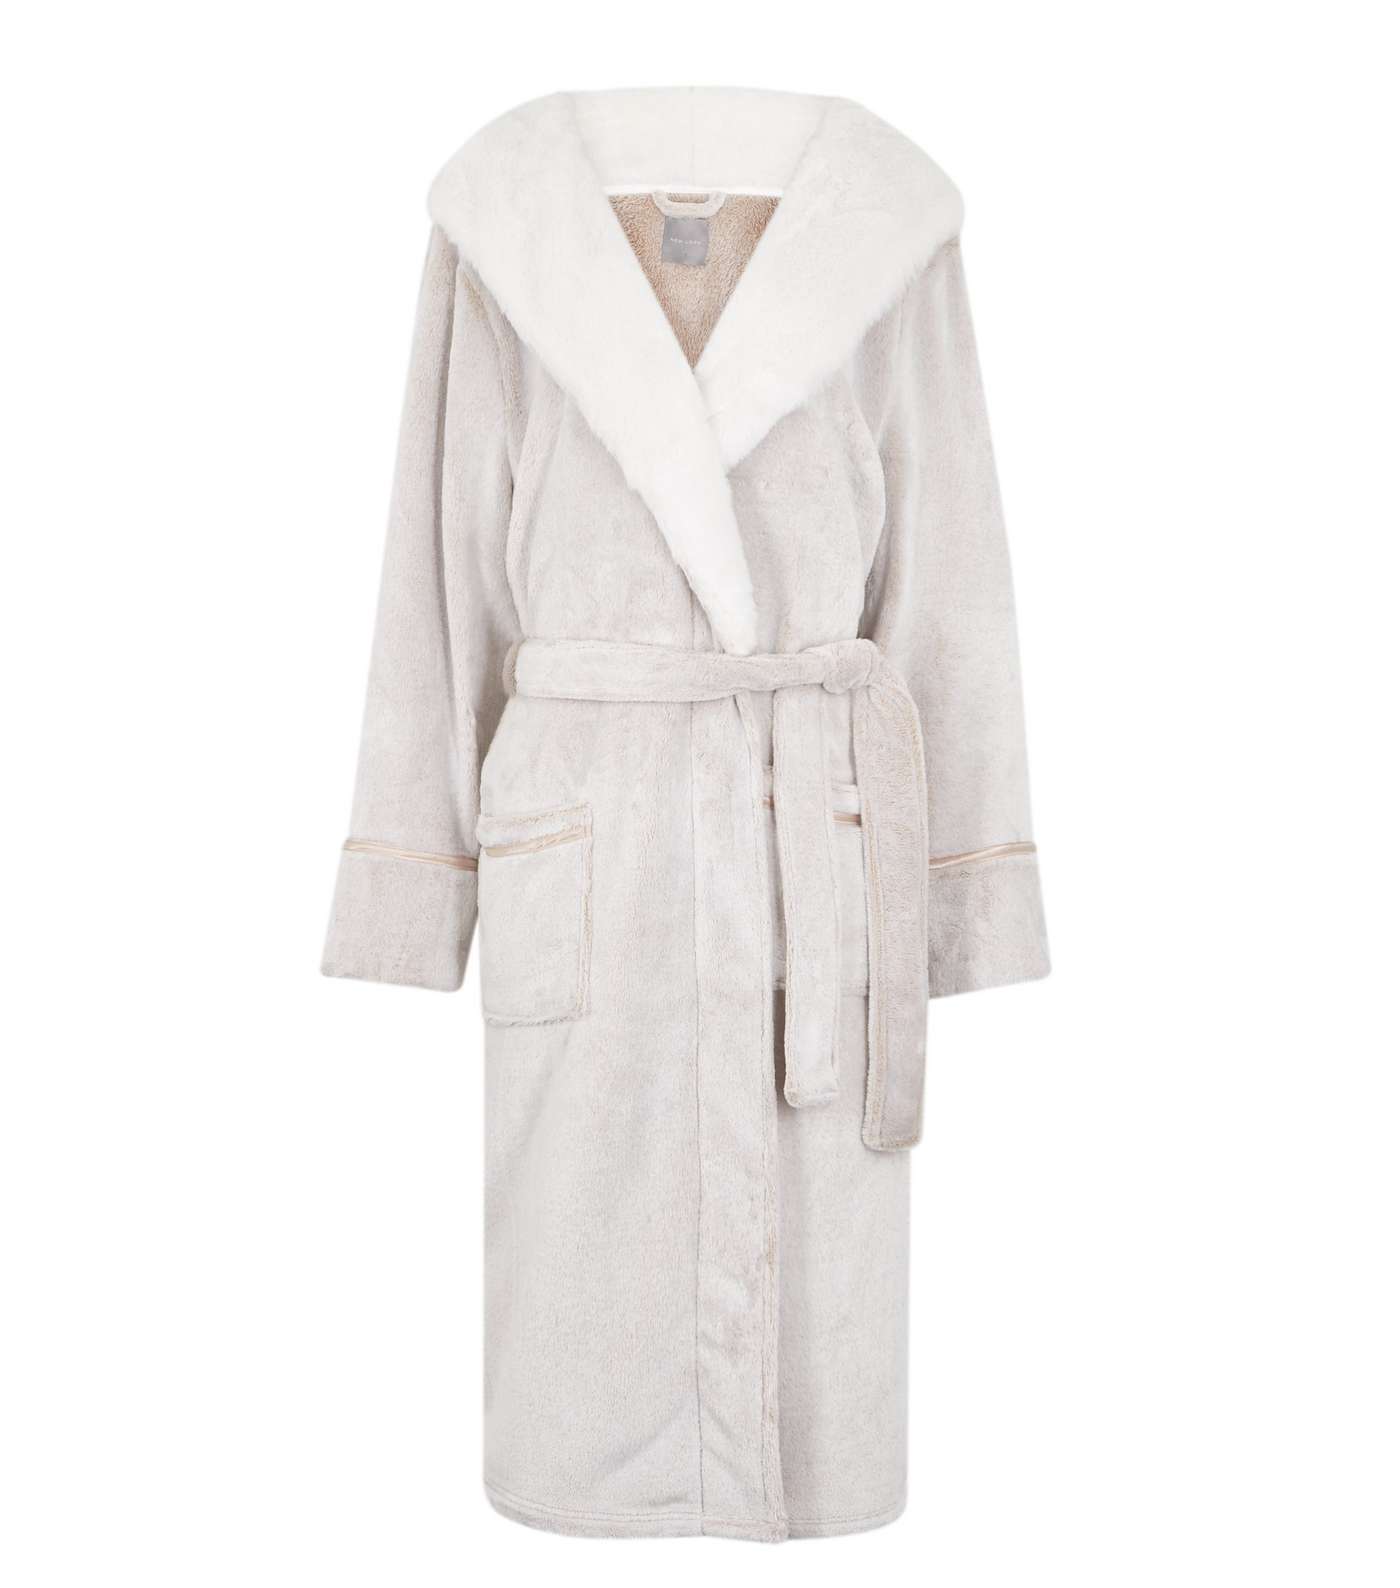 Cream Soft Fleece Hooded Dressing Gown Image 5